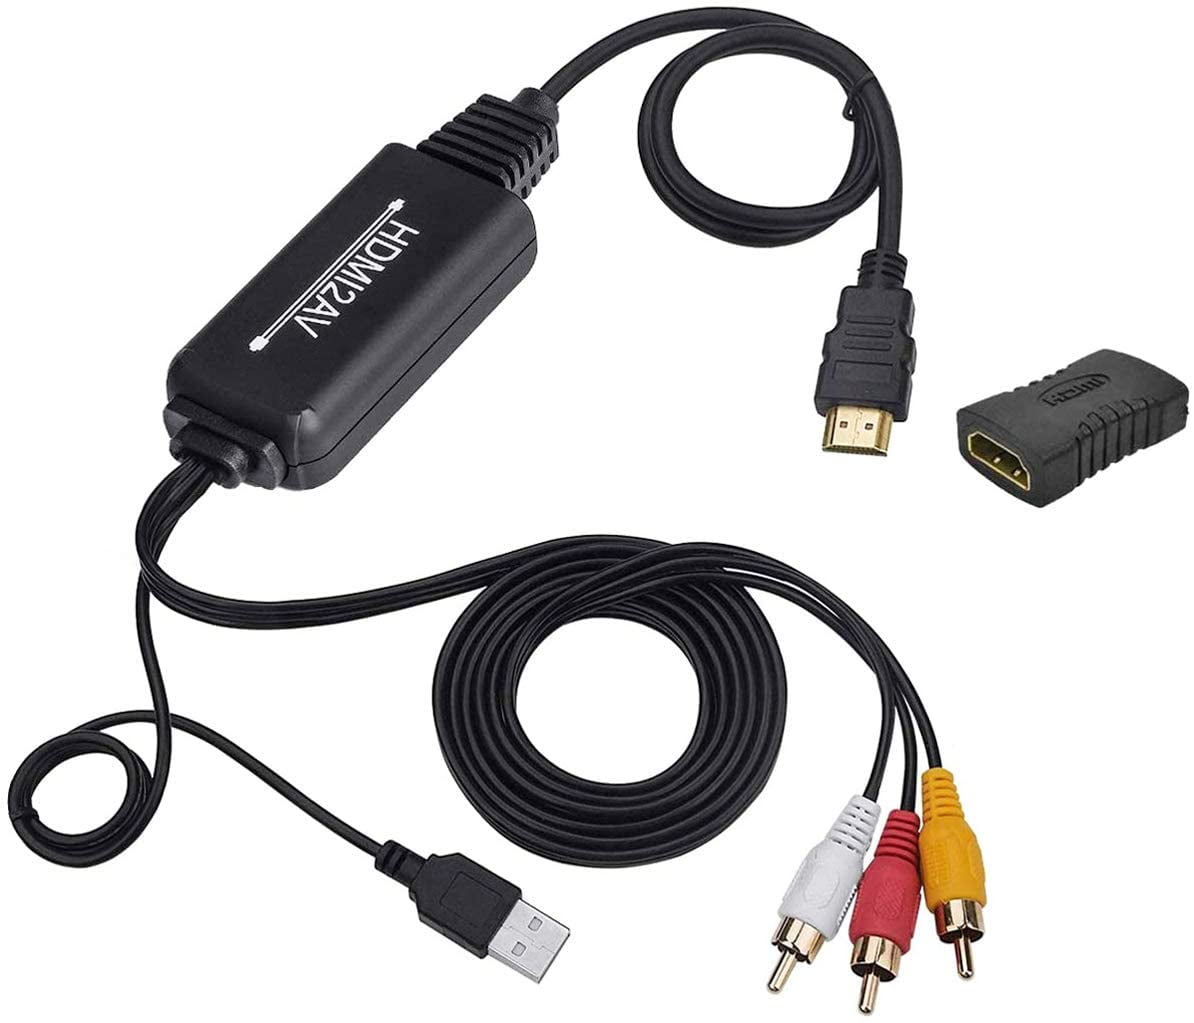 HDMI to RCA Converter HDMI to AV Adapter Compatible for Apple TV, Xiaomi Mi  Box, Android TV Box, Roku, Fire Stick, DVD, Blu-ray Player ect. Supports